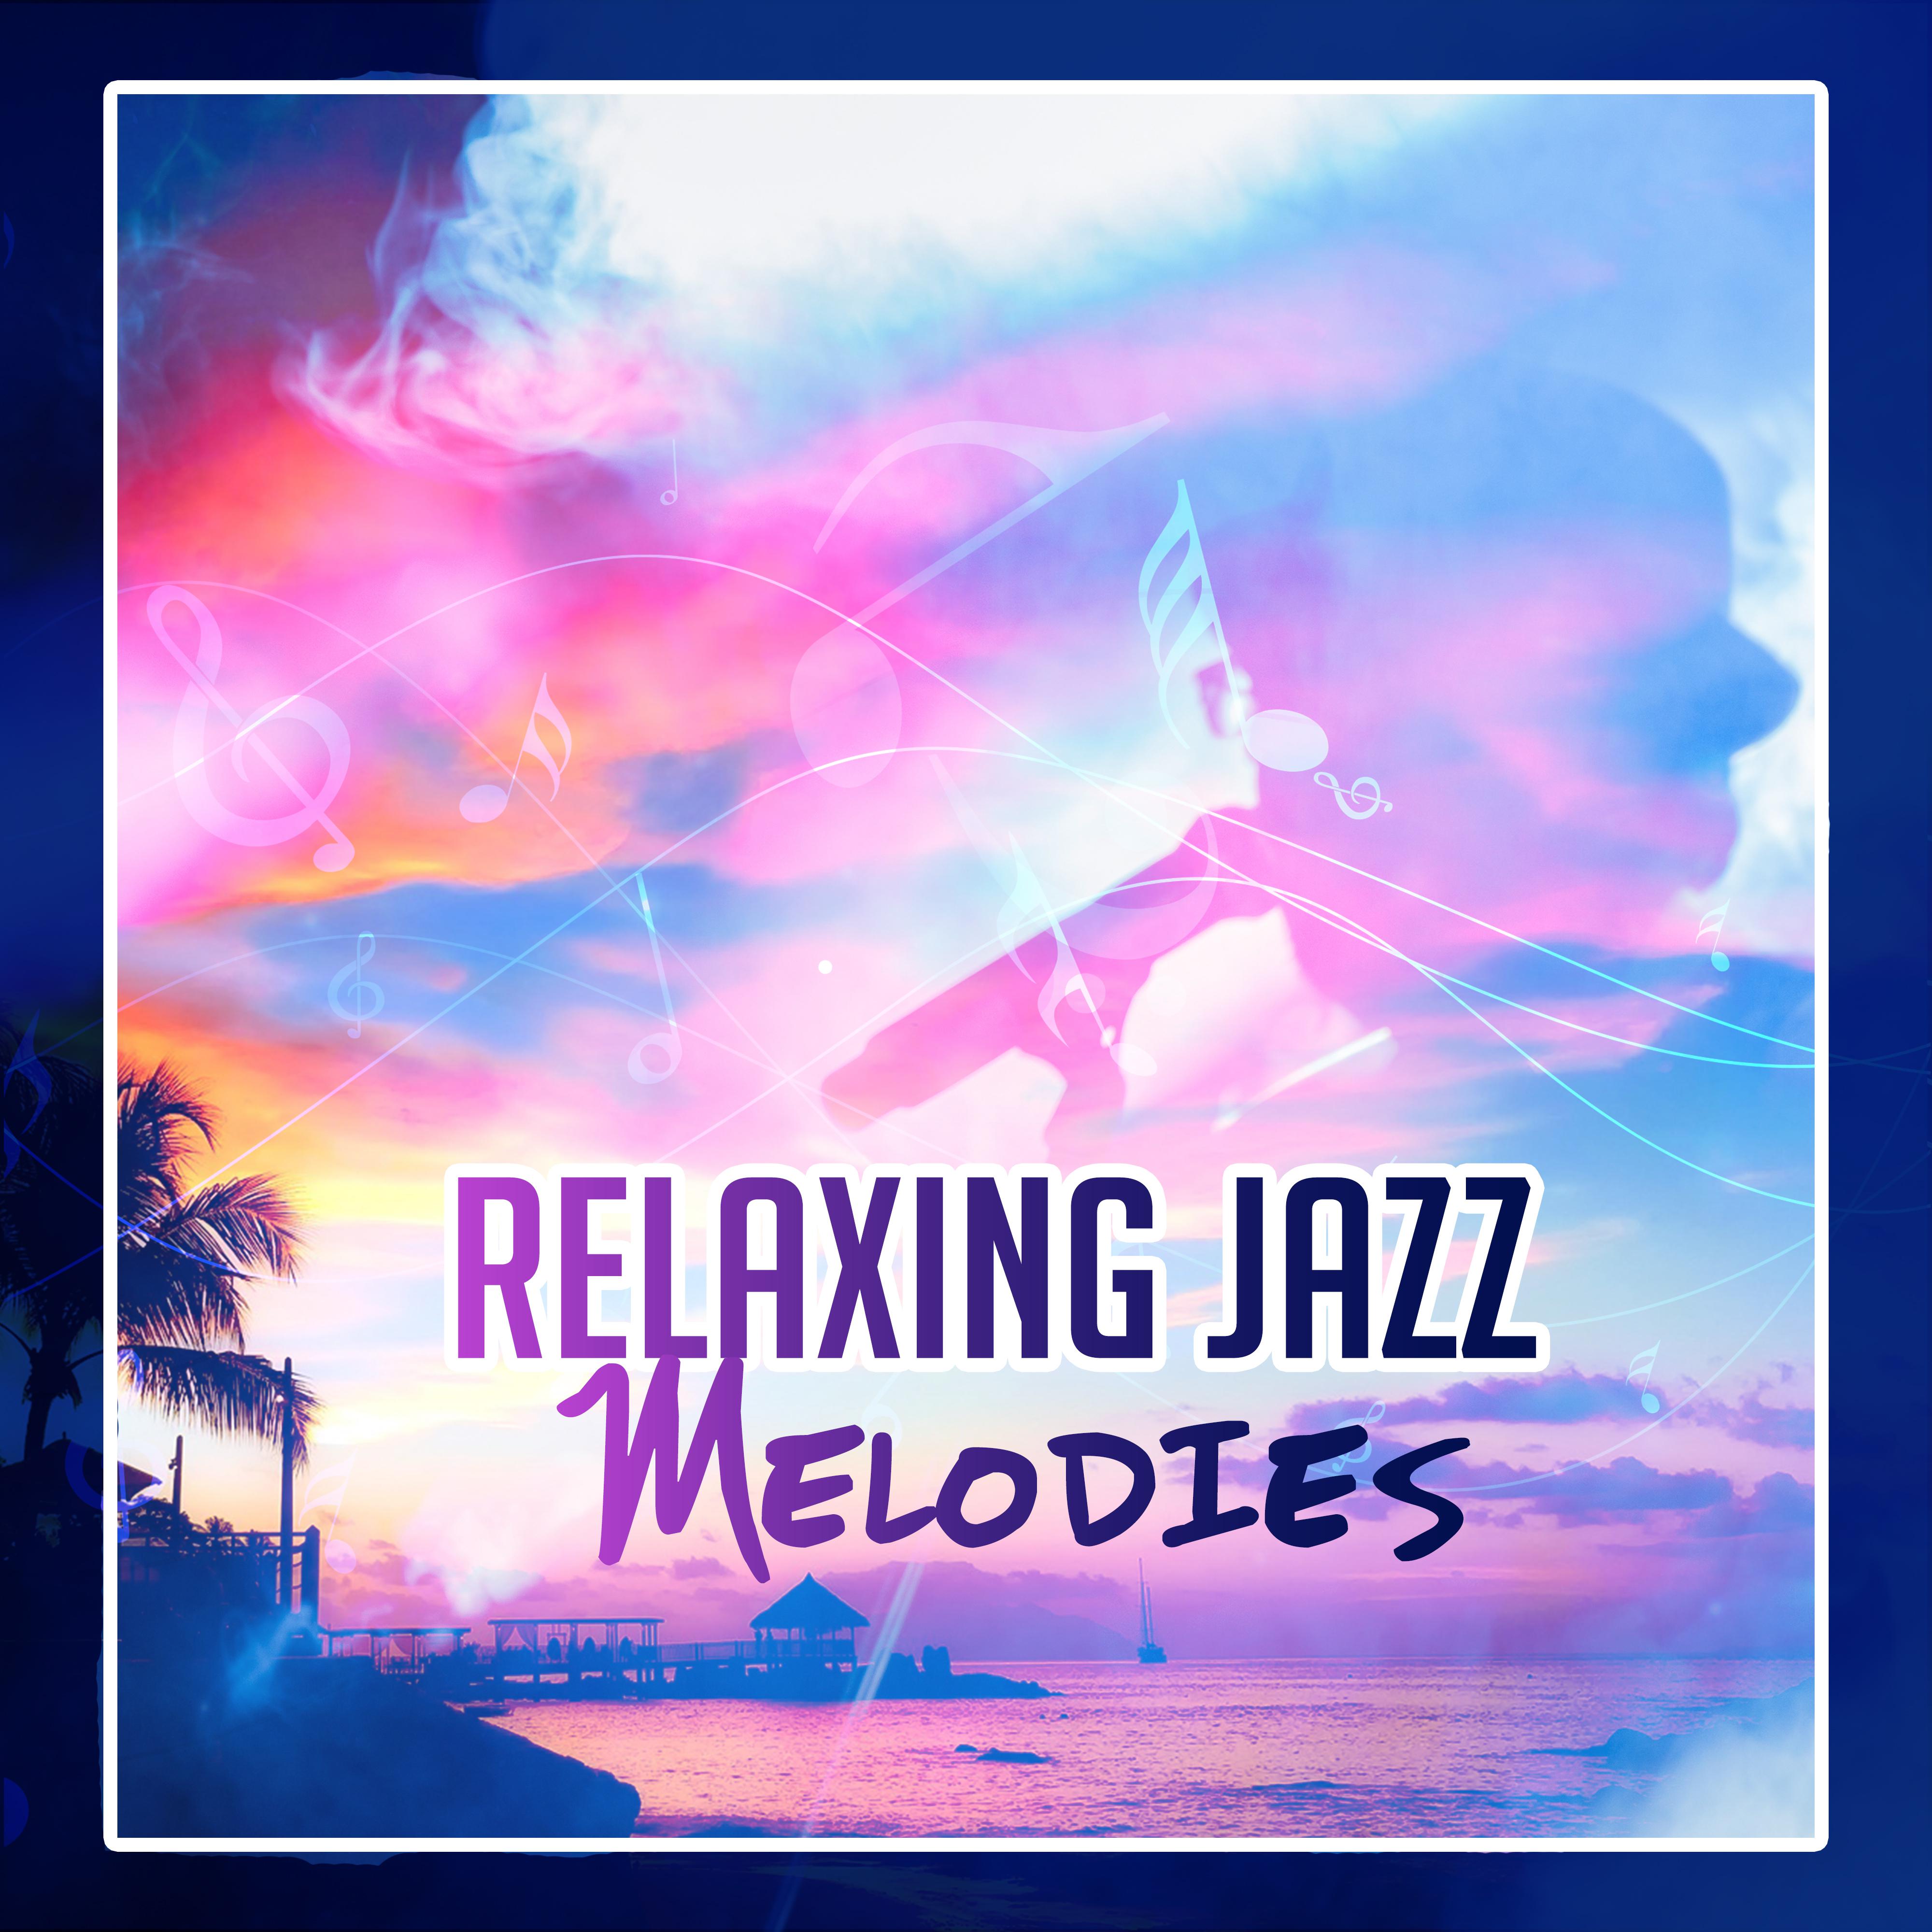 Relaxing Jazz Melodies  Smooth Jazz Vibes, Instrumental Music, Calm Background Sounds to Rest